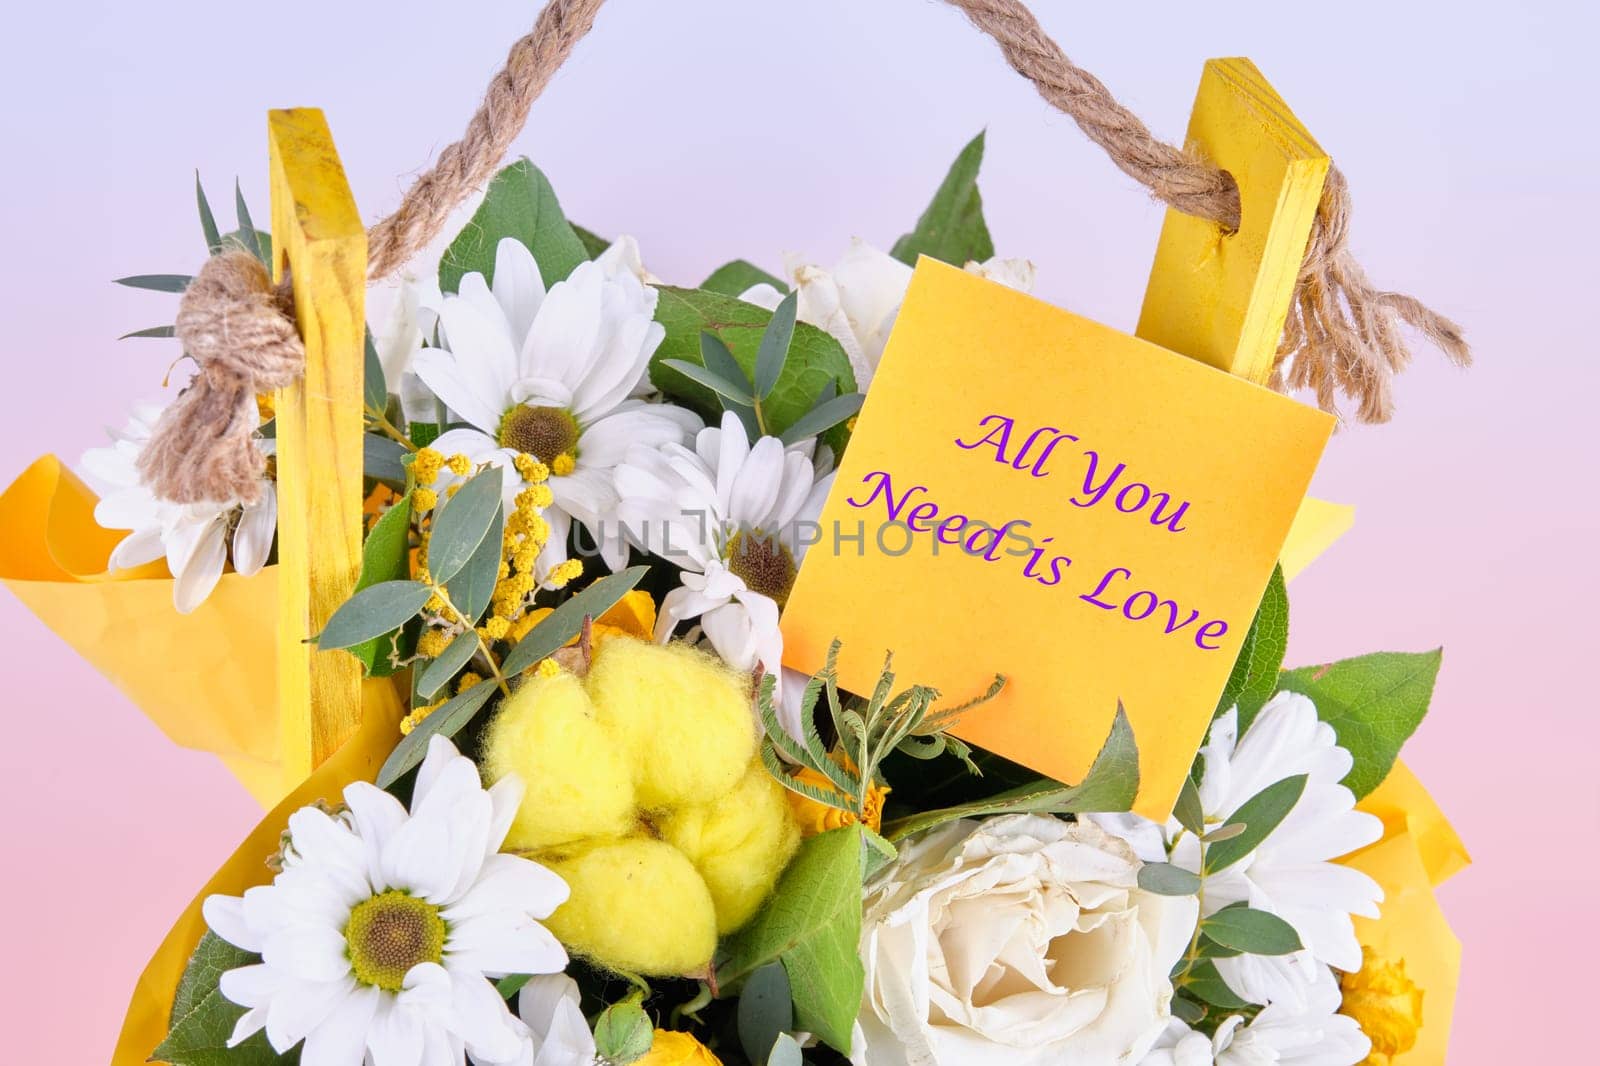 All you need is love slogan written on the sticker on the flowers. Concept photo